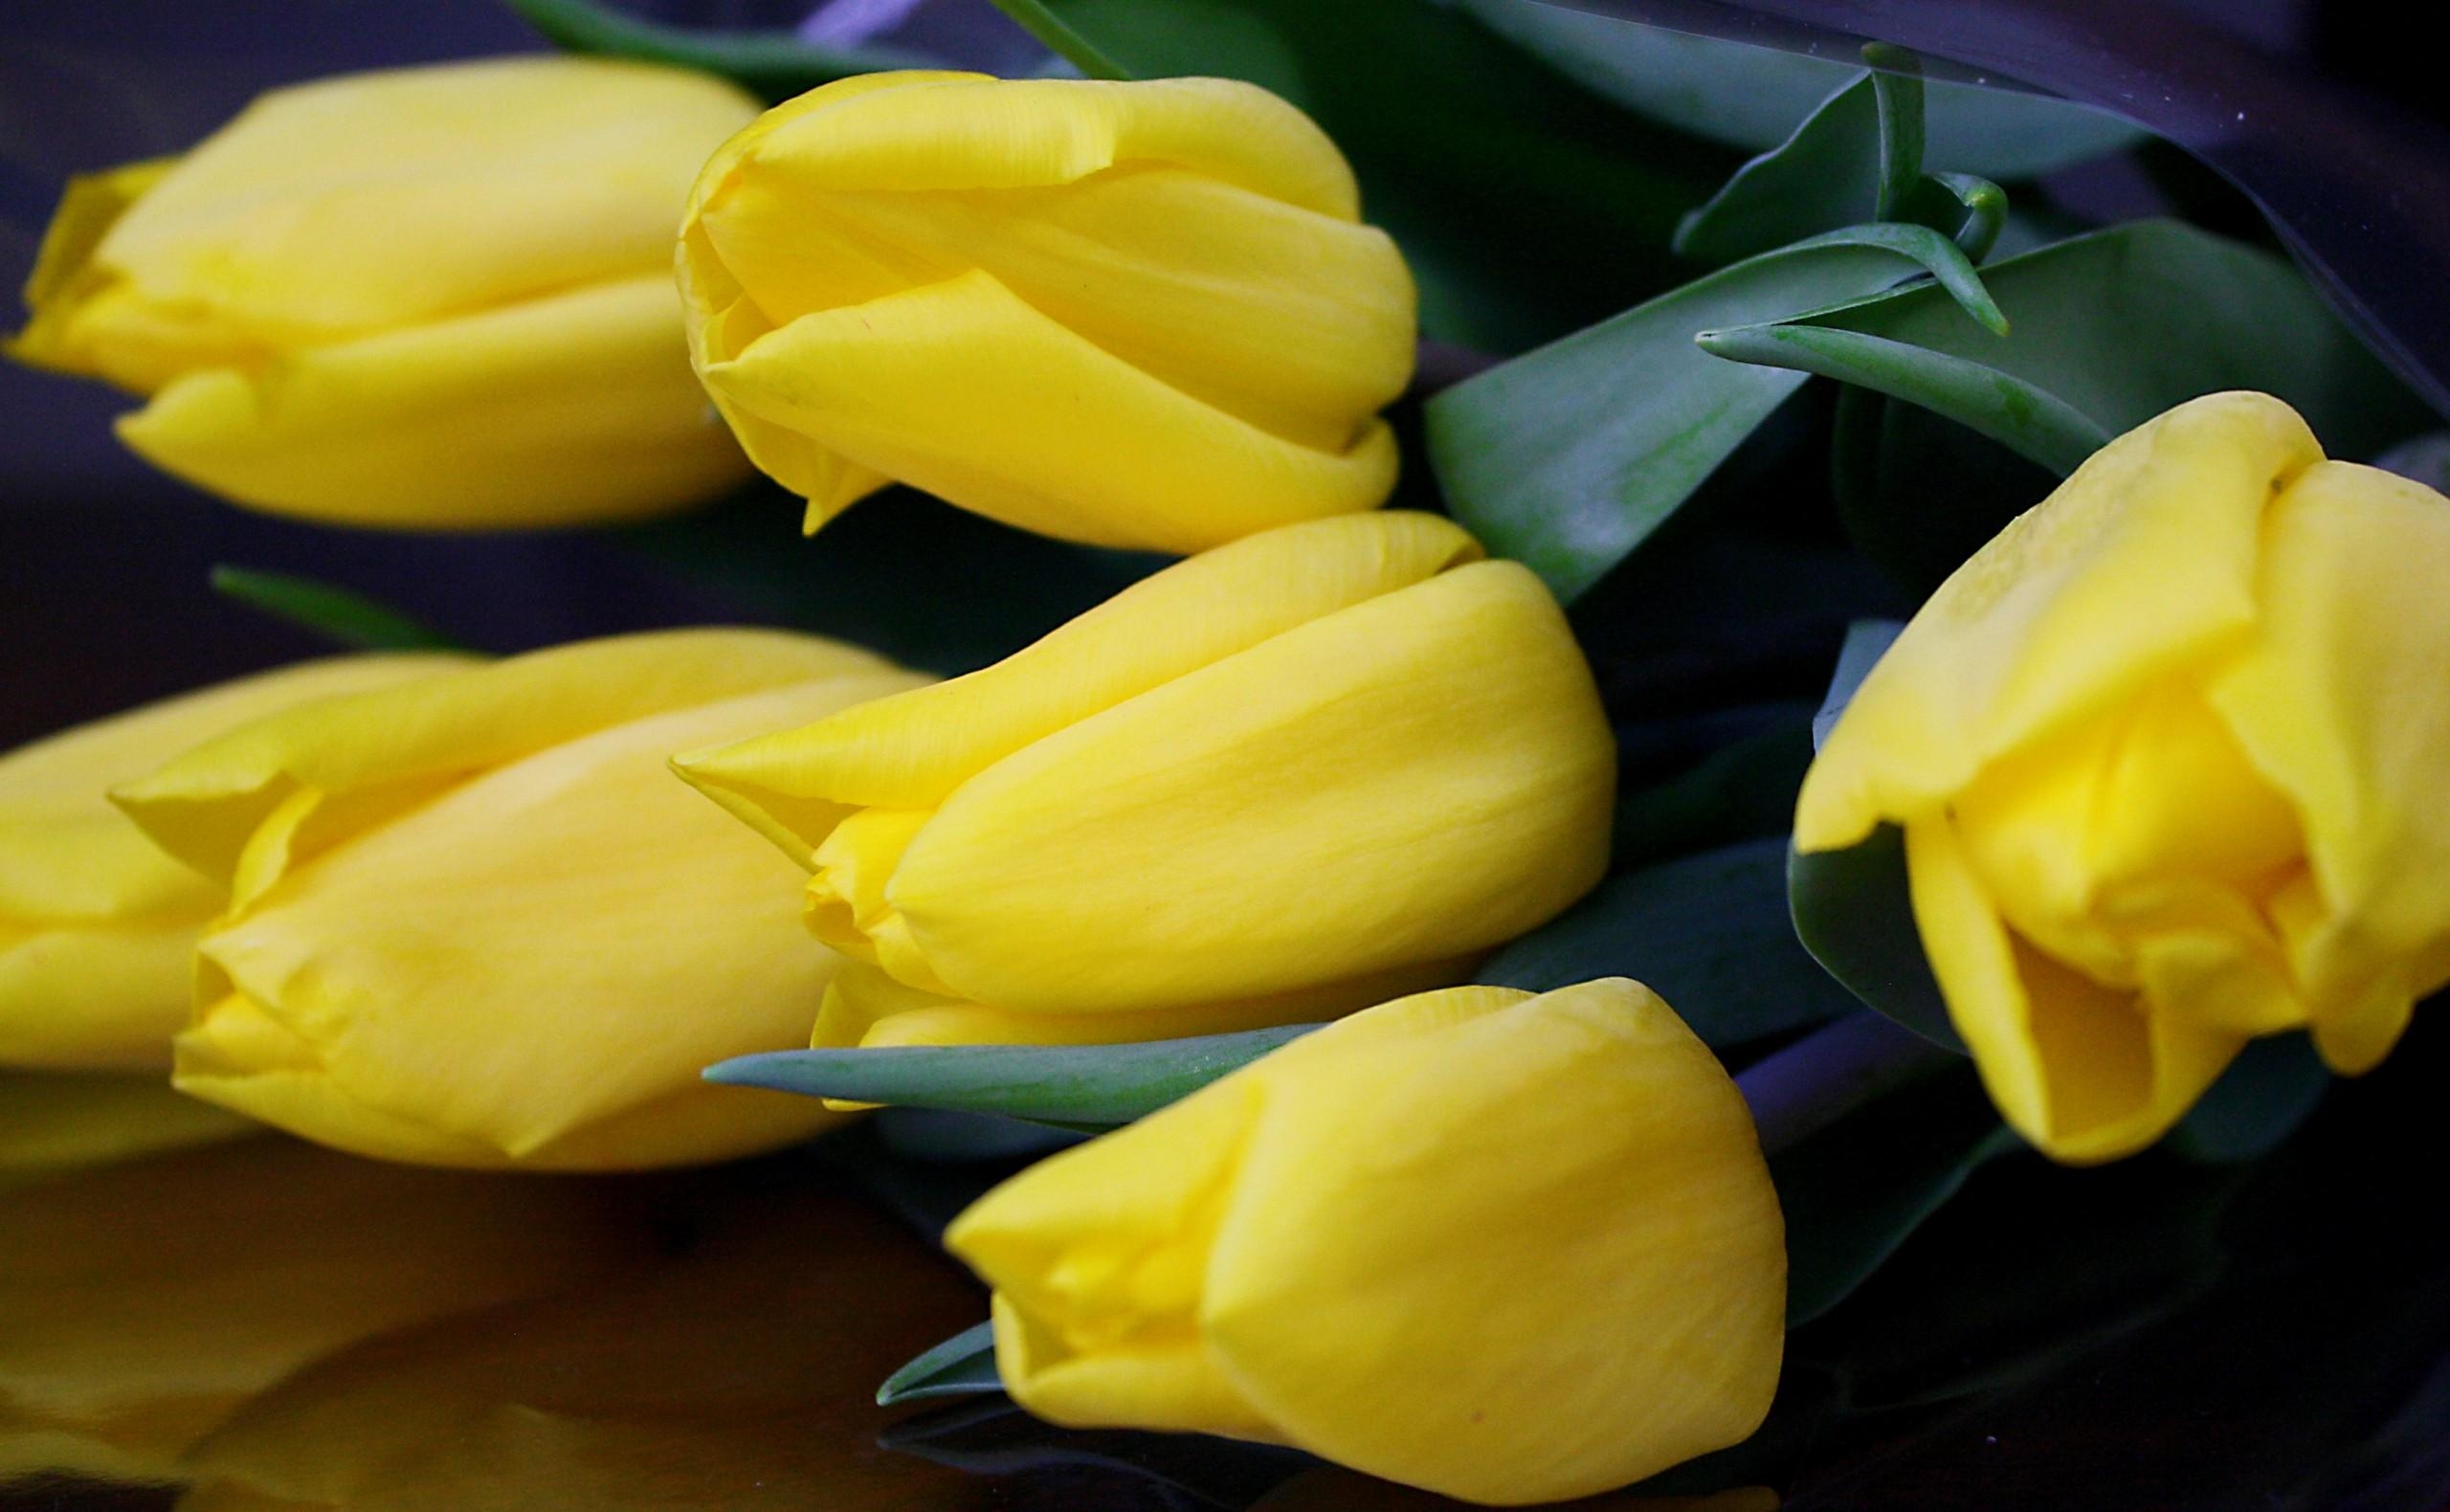 New Lock Screen Wallpapers tulips, flowers, yellow, to lie down, lie